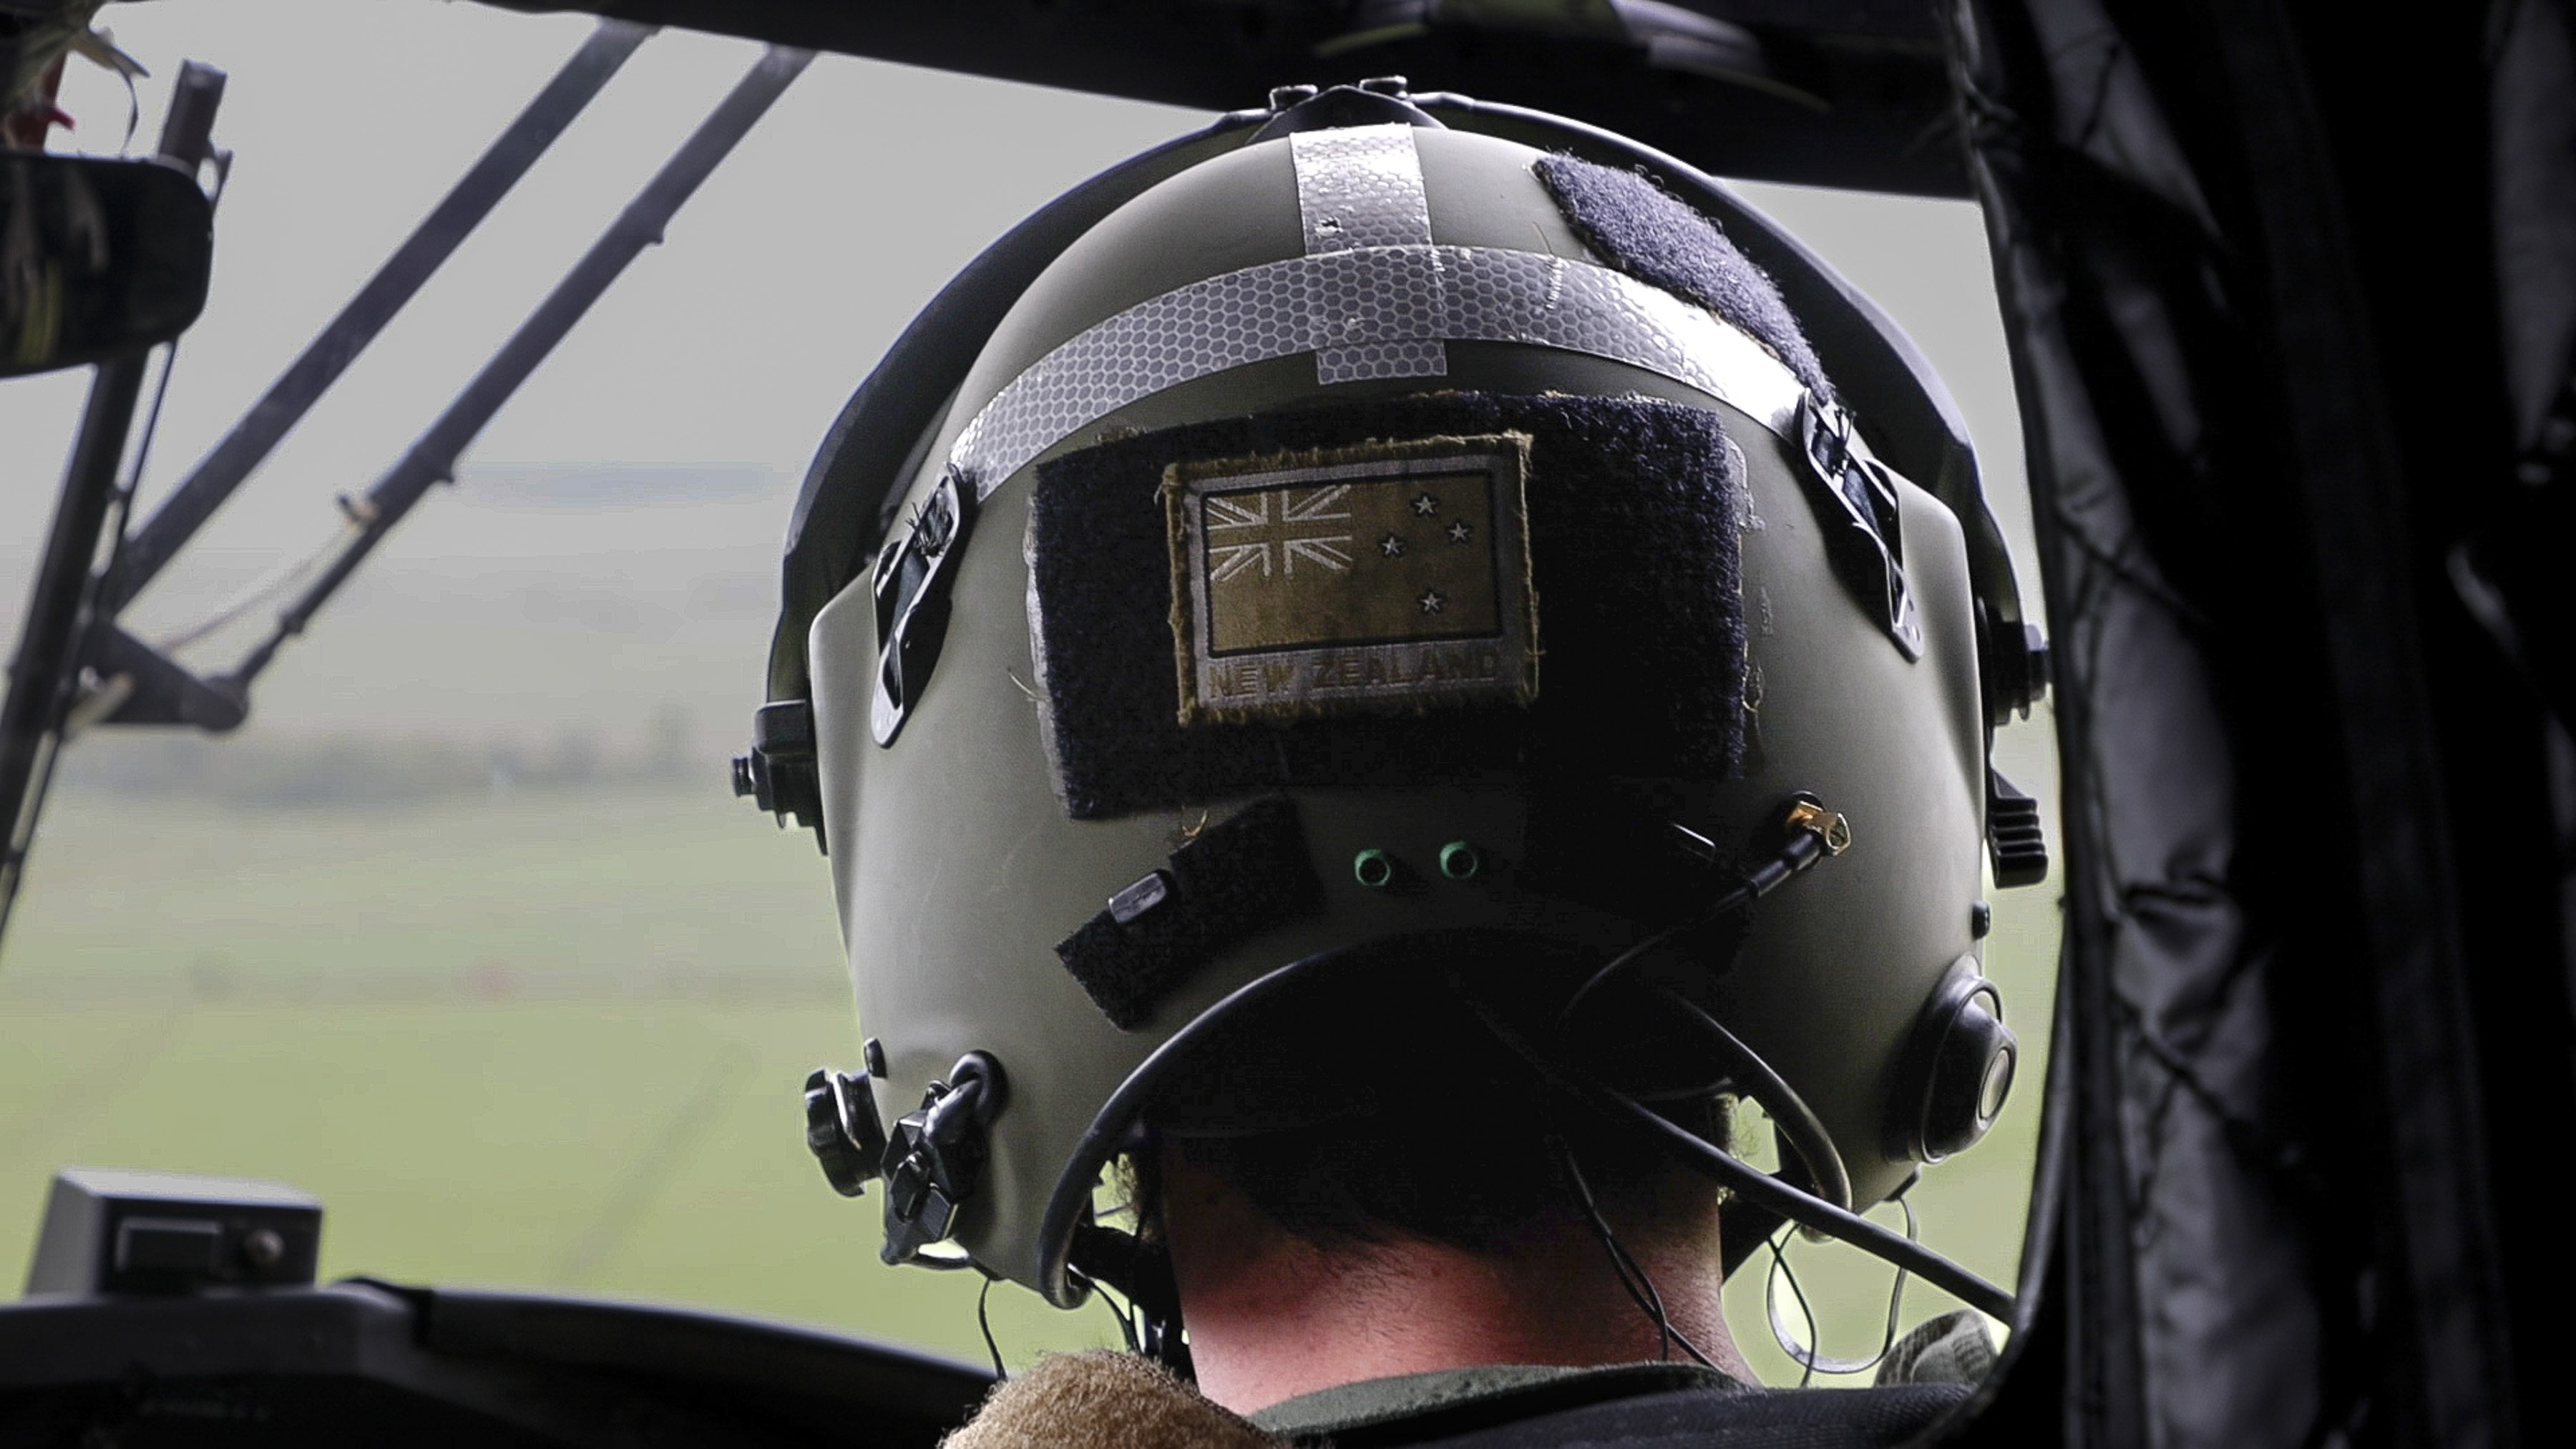 Back of the head of the New Zealand pilot as he flies the chinook, his New Zealand patch evident on the back of his flight helmet. 